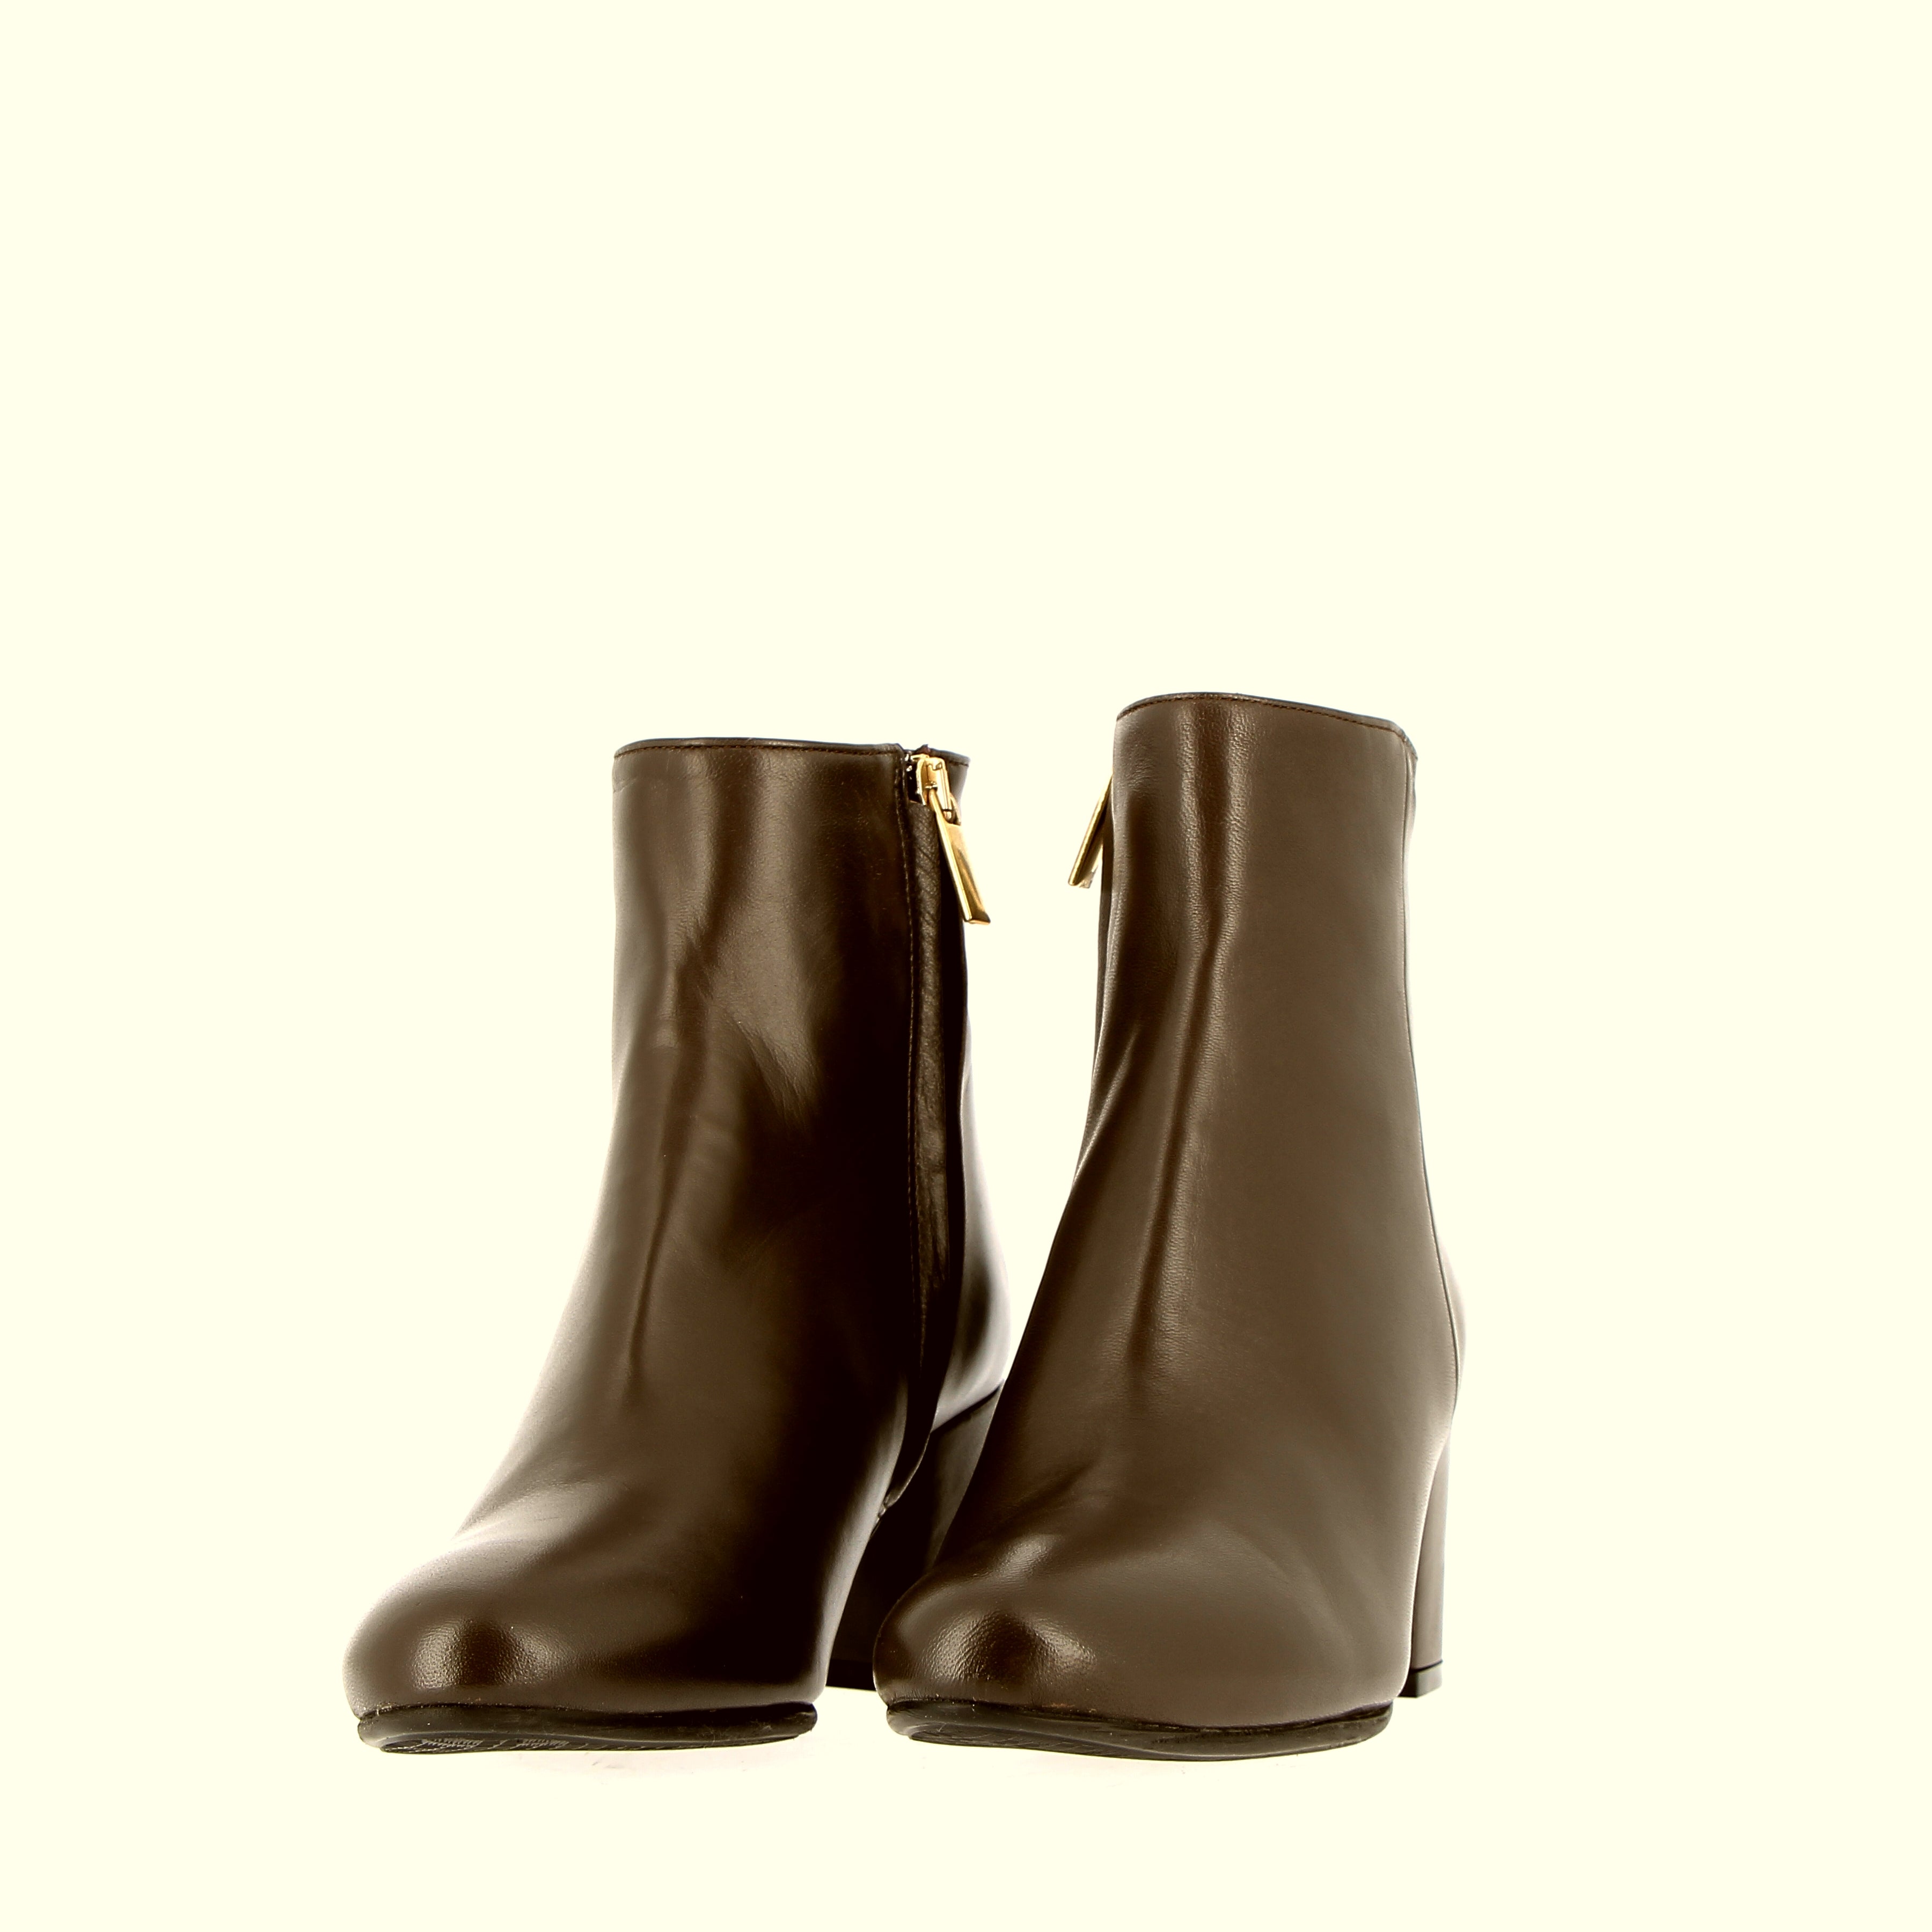 Ankle boot in chocolate brown nappa leather